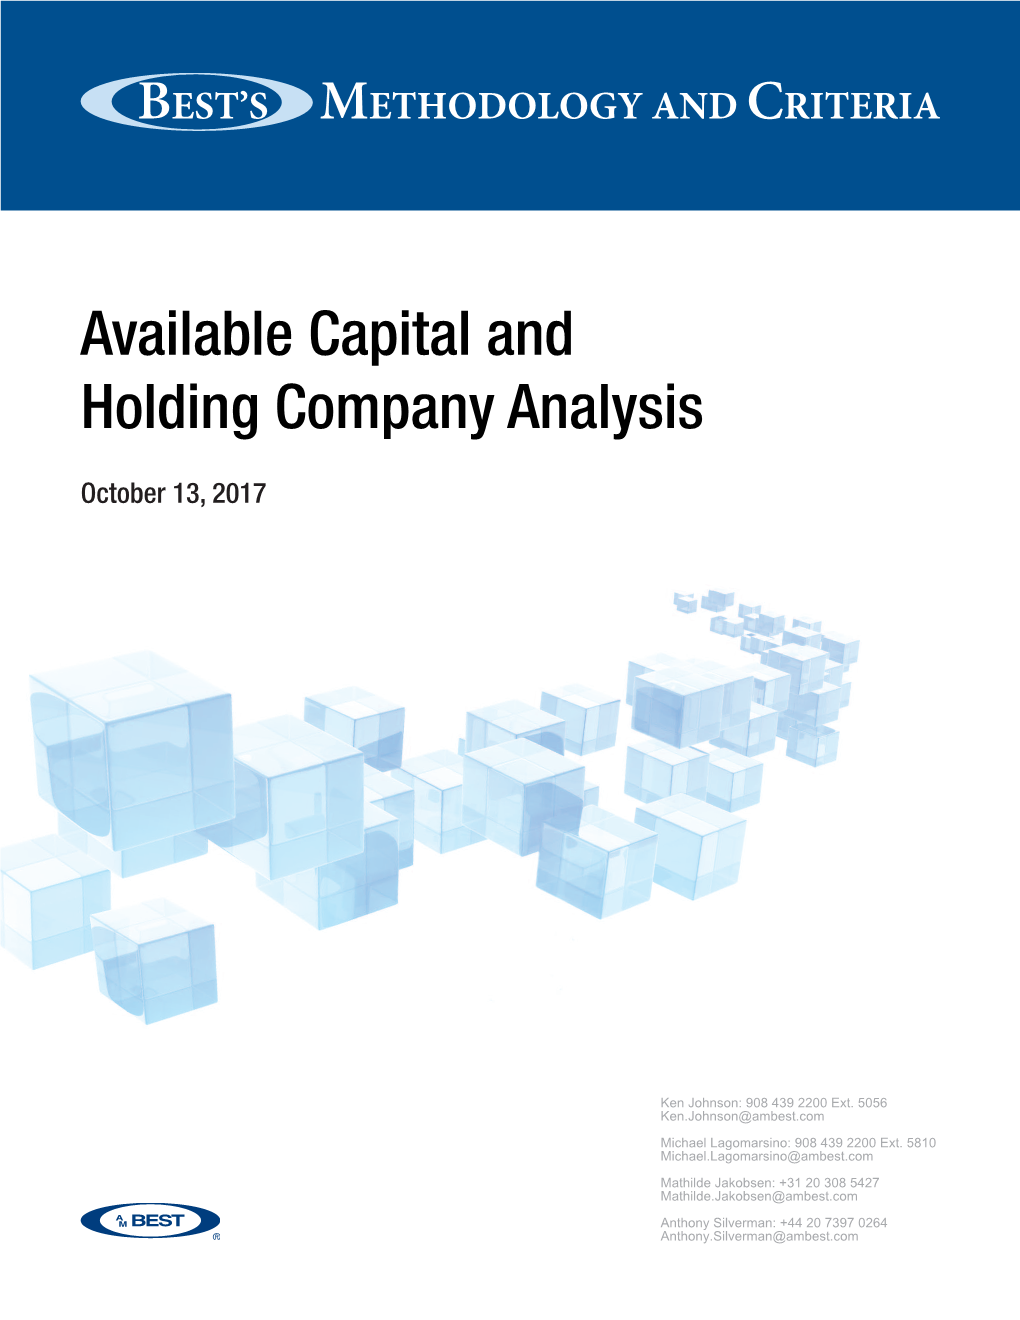 Available Capital and Holding Company Analysis